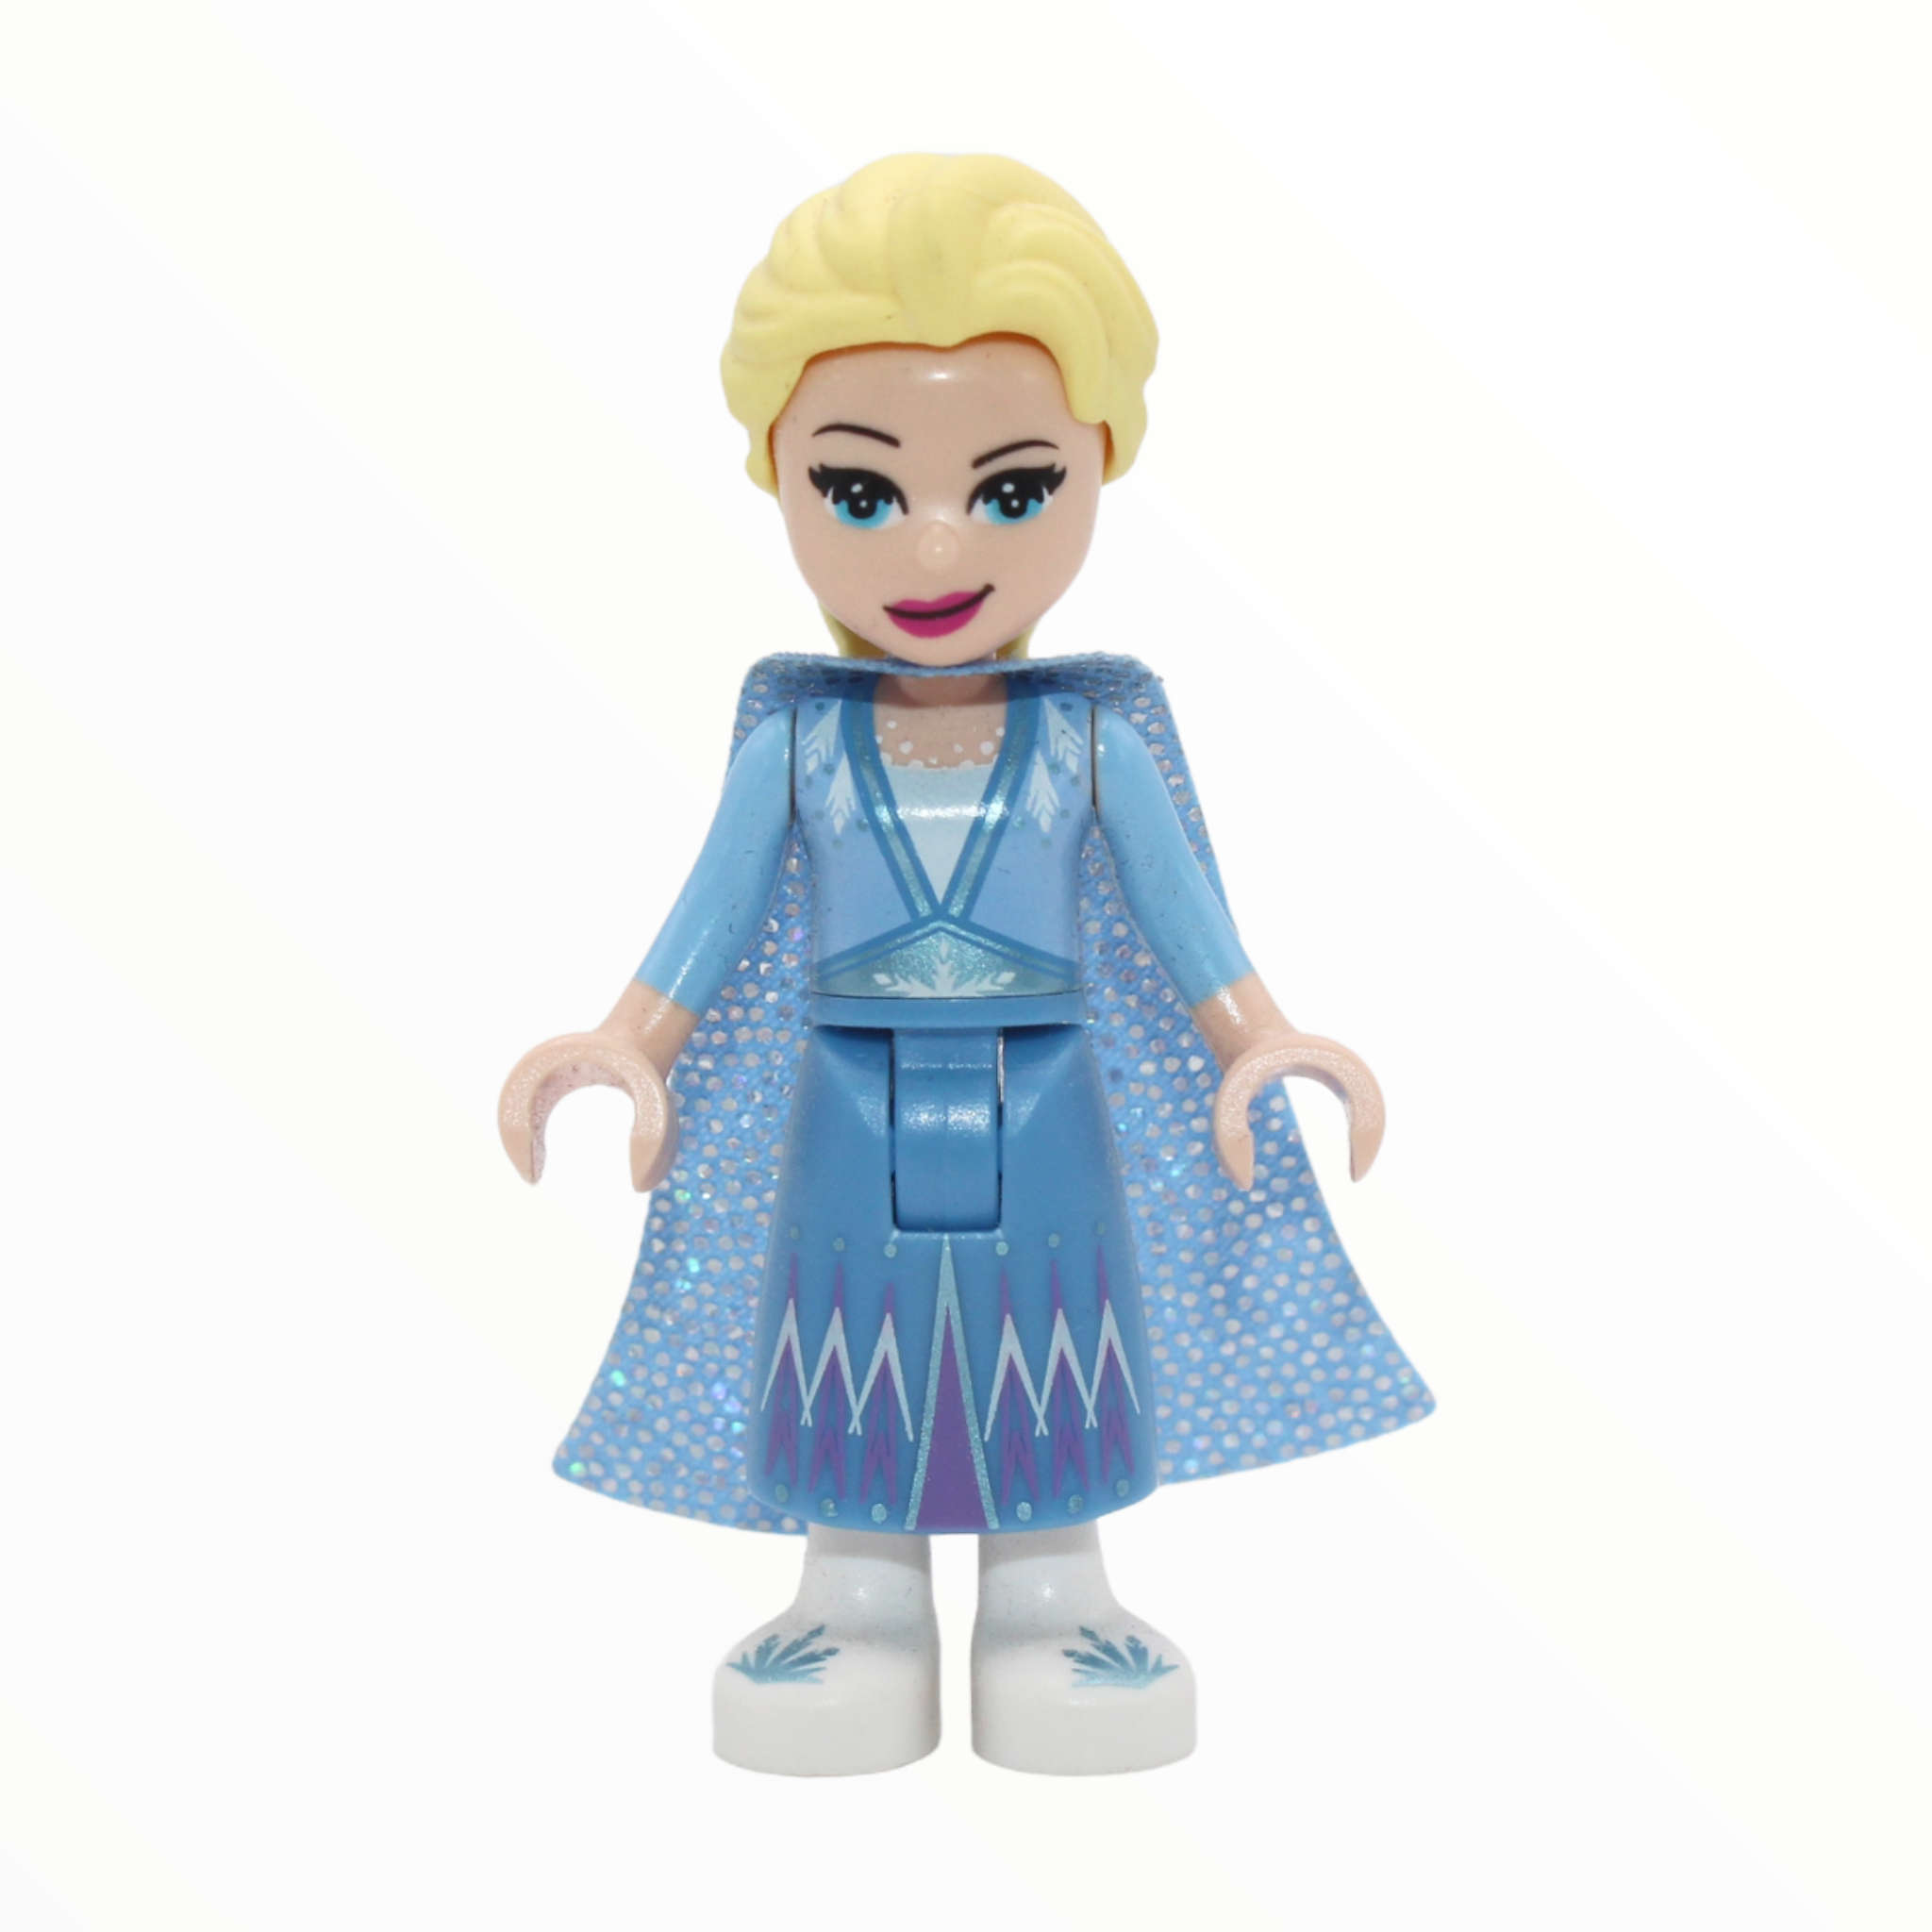 Elsa (cape with two tails, blue skirt, white shoes)